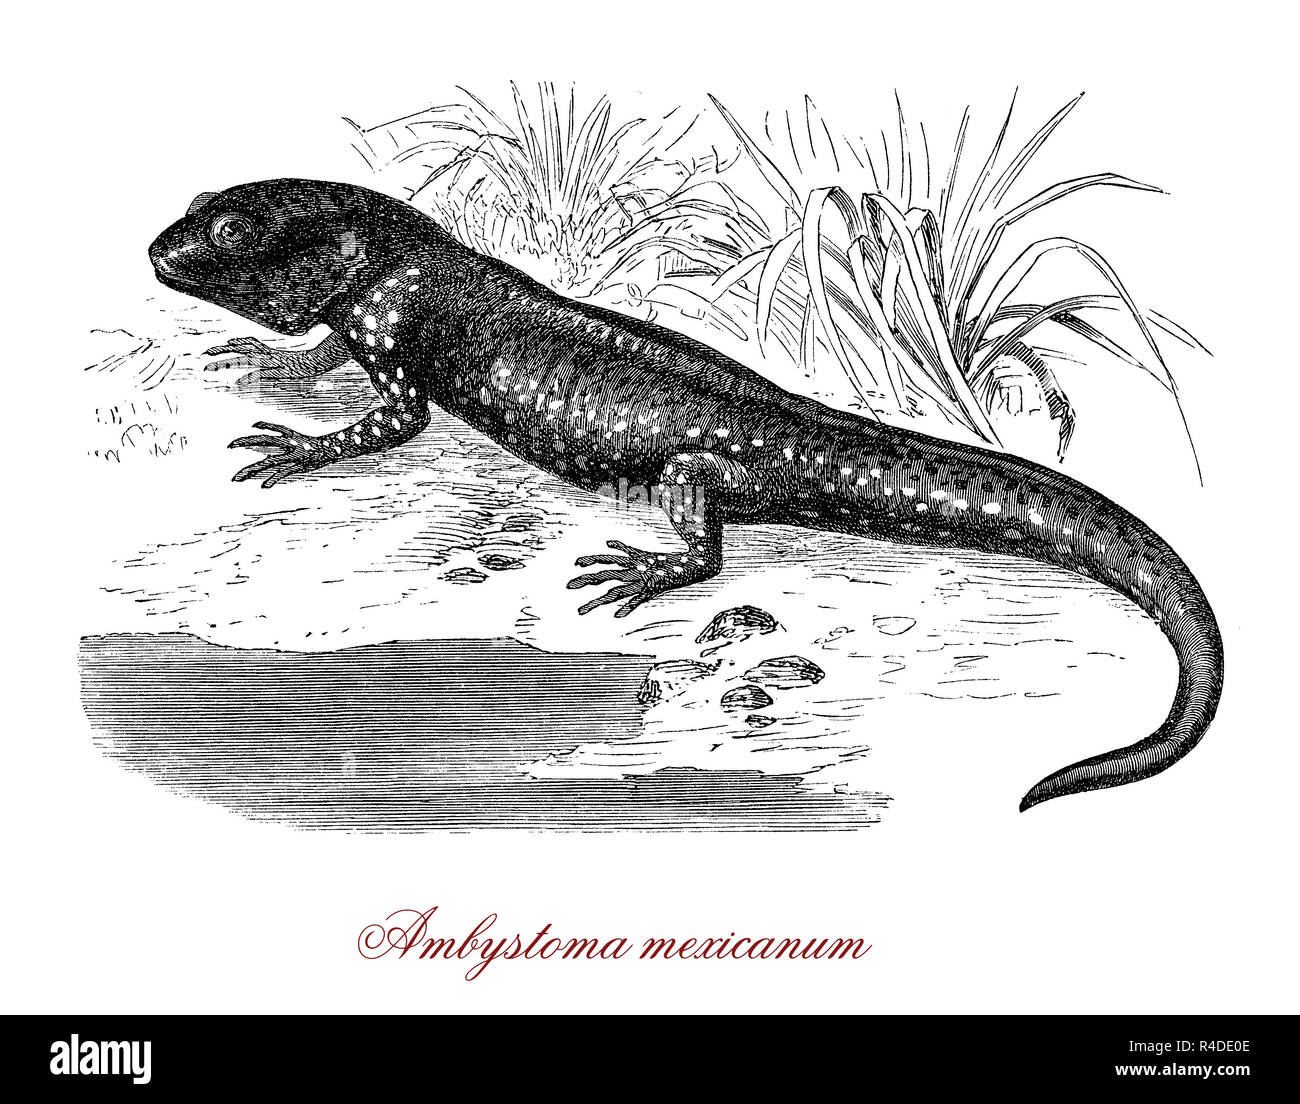 Vintage illustration of  axolotol, Mexican salamander and endangered species Stock Photo